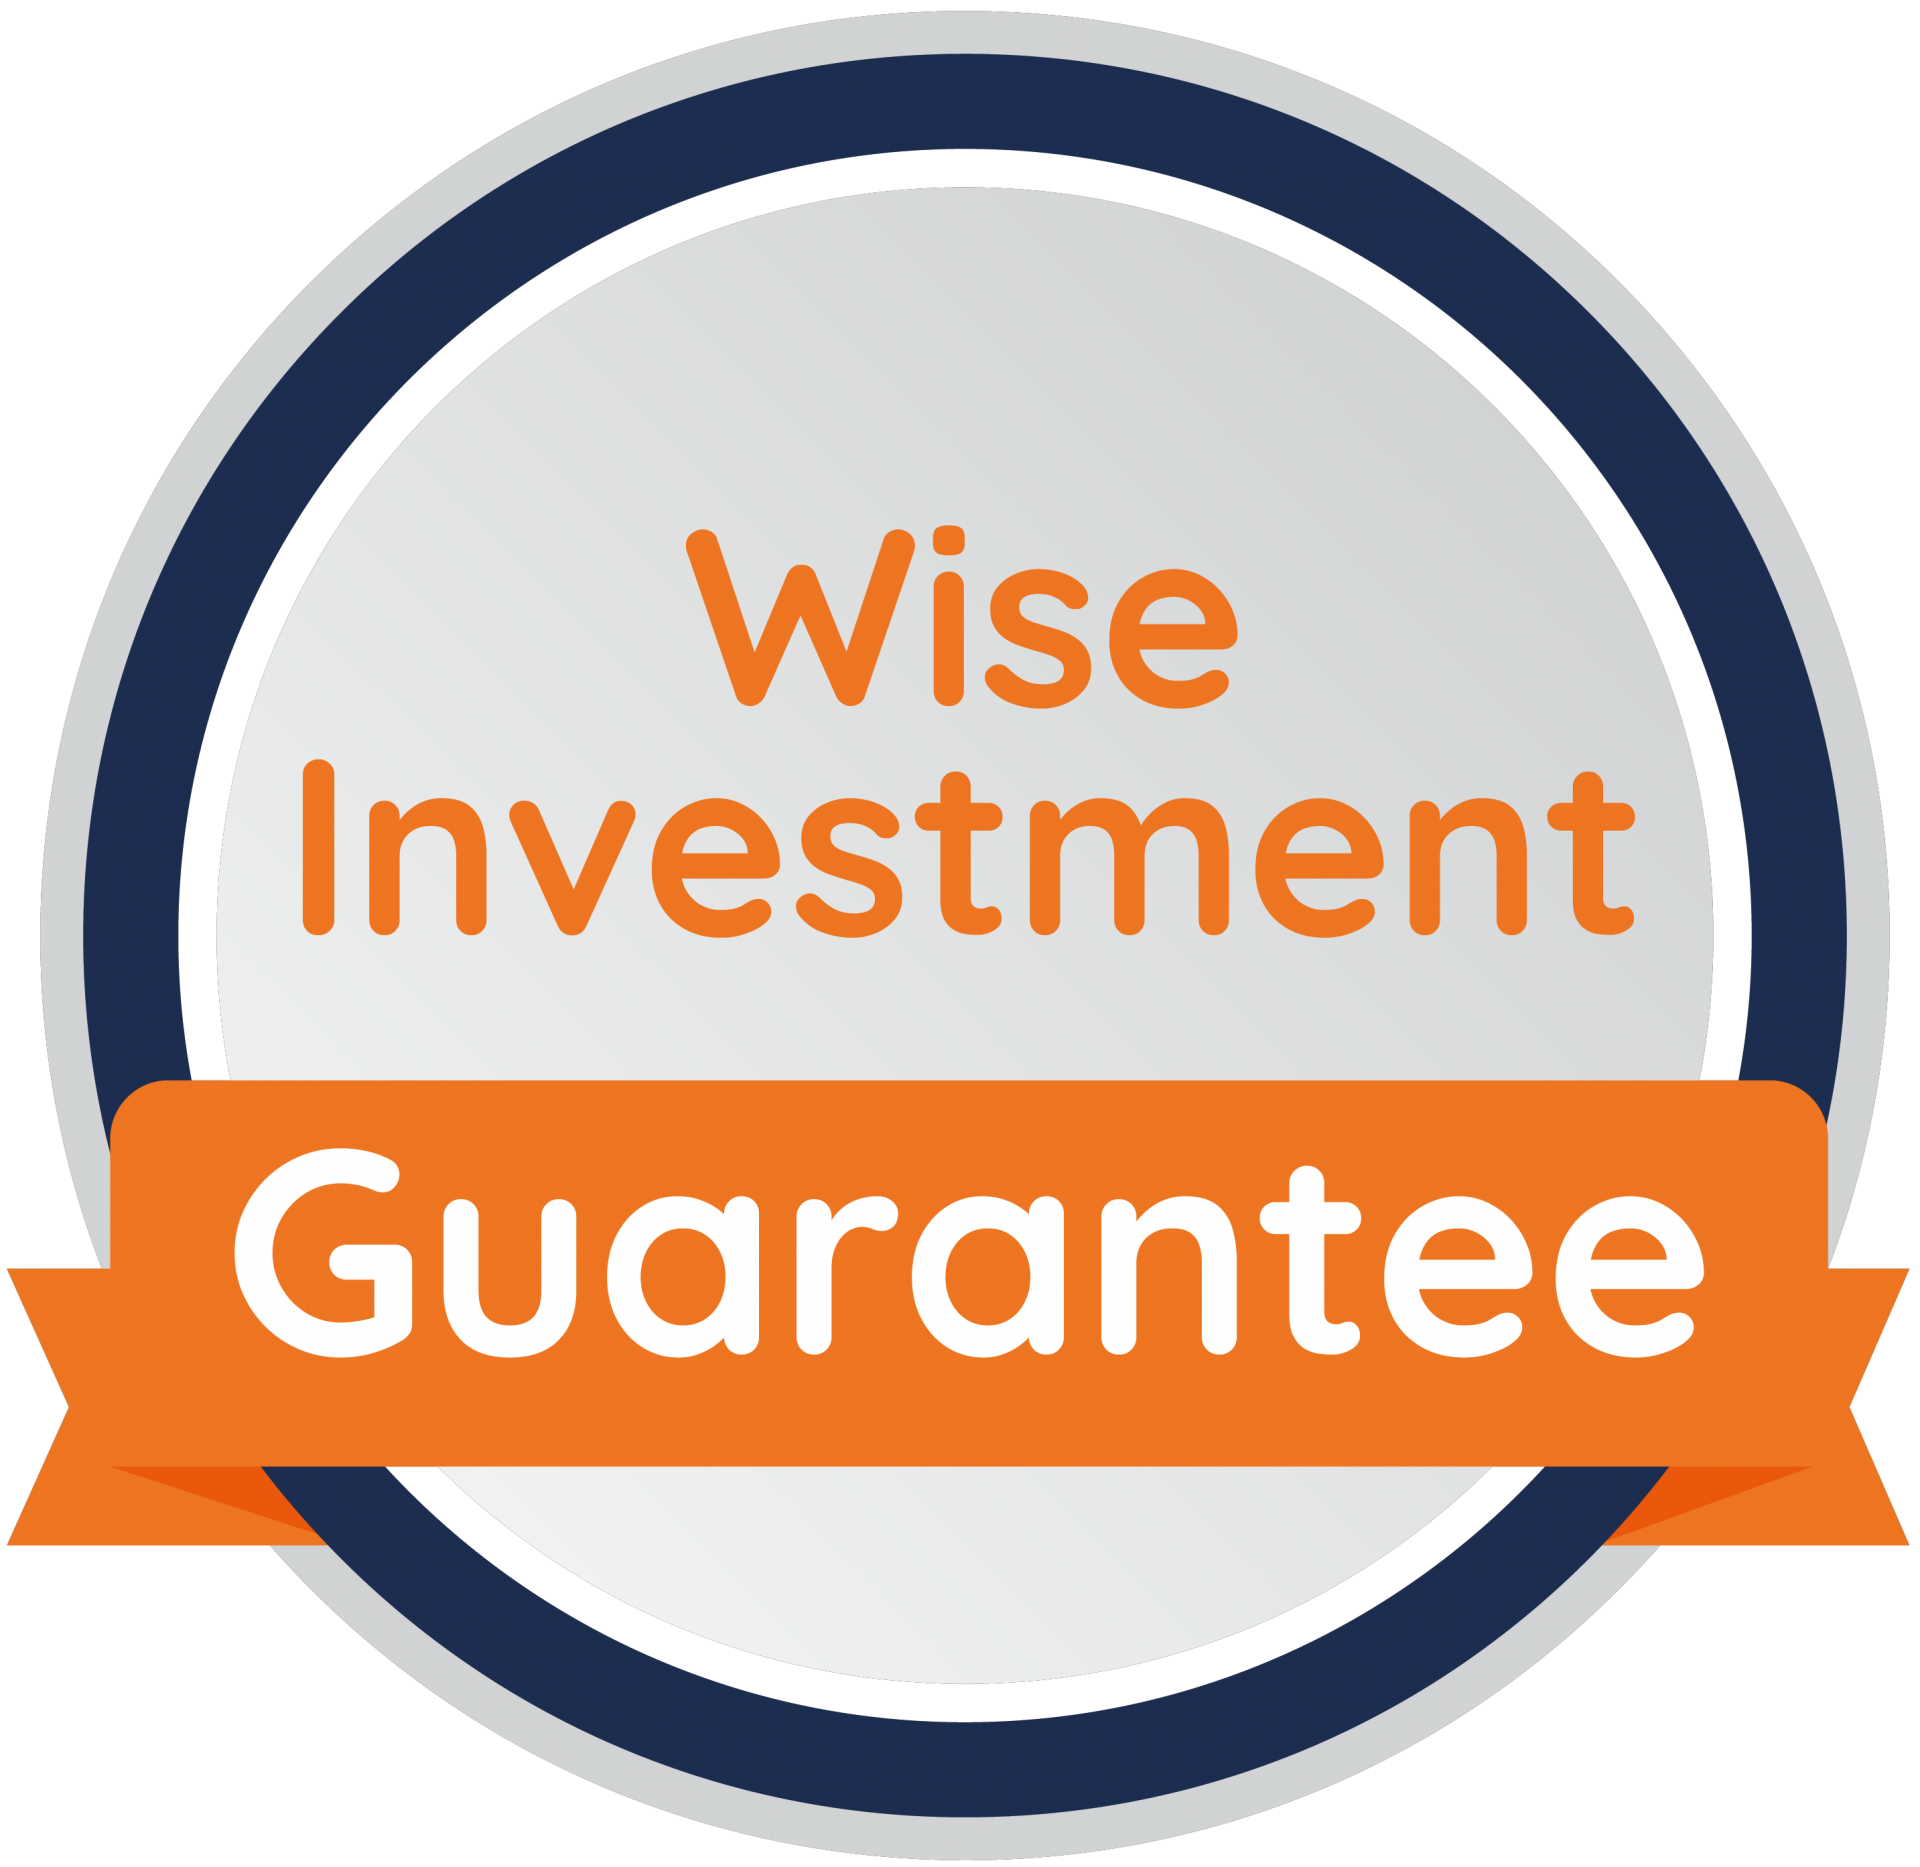 Wise Investment Guarantee